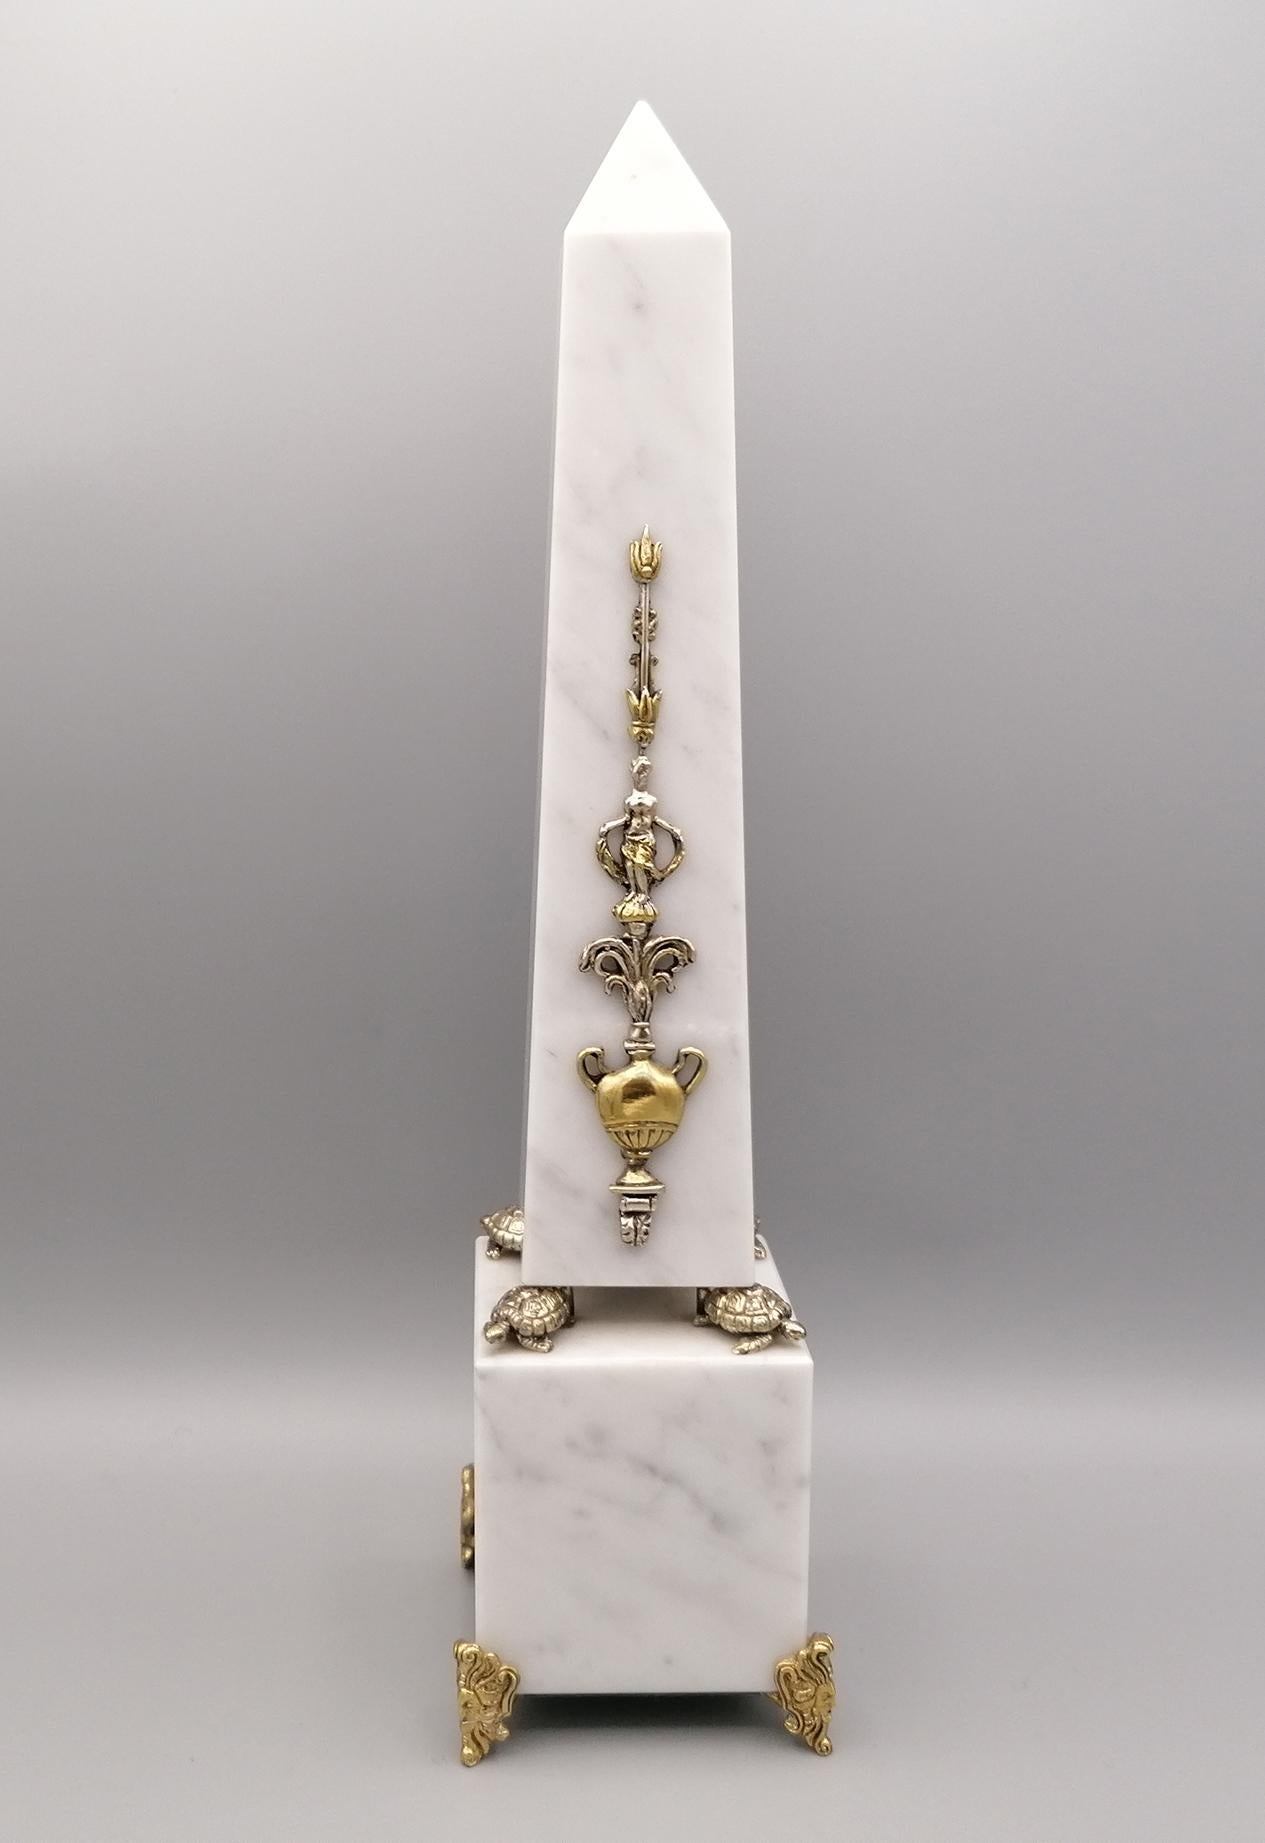 White Carrara marble obelisk with sterling silver friezes.
The obelisk frieze, in gilded and natural sterling silver, depicts a jug from which water flows at the feet of a woman and is placed on a base, also in white marble, on 4 turtles in 925